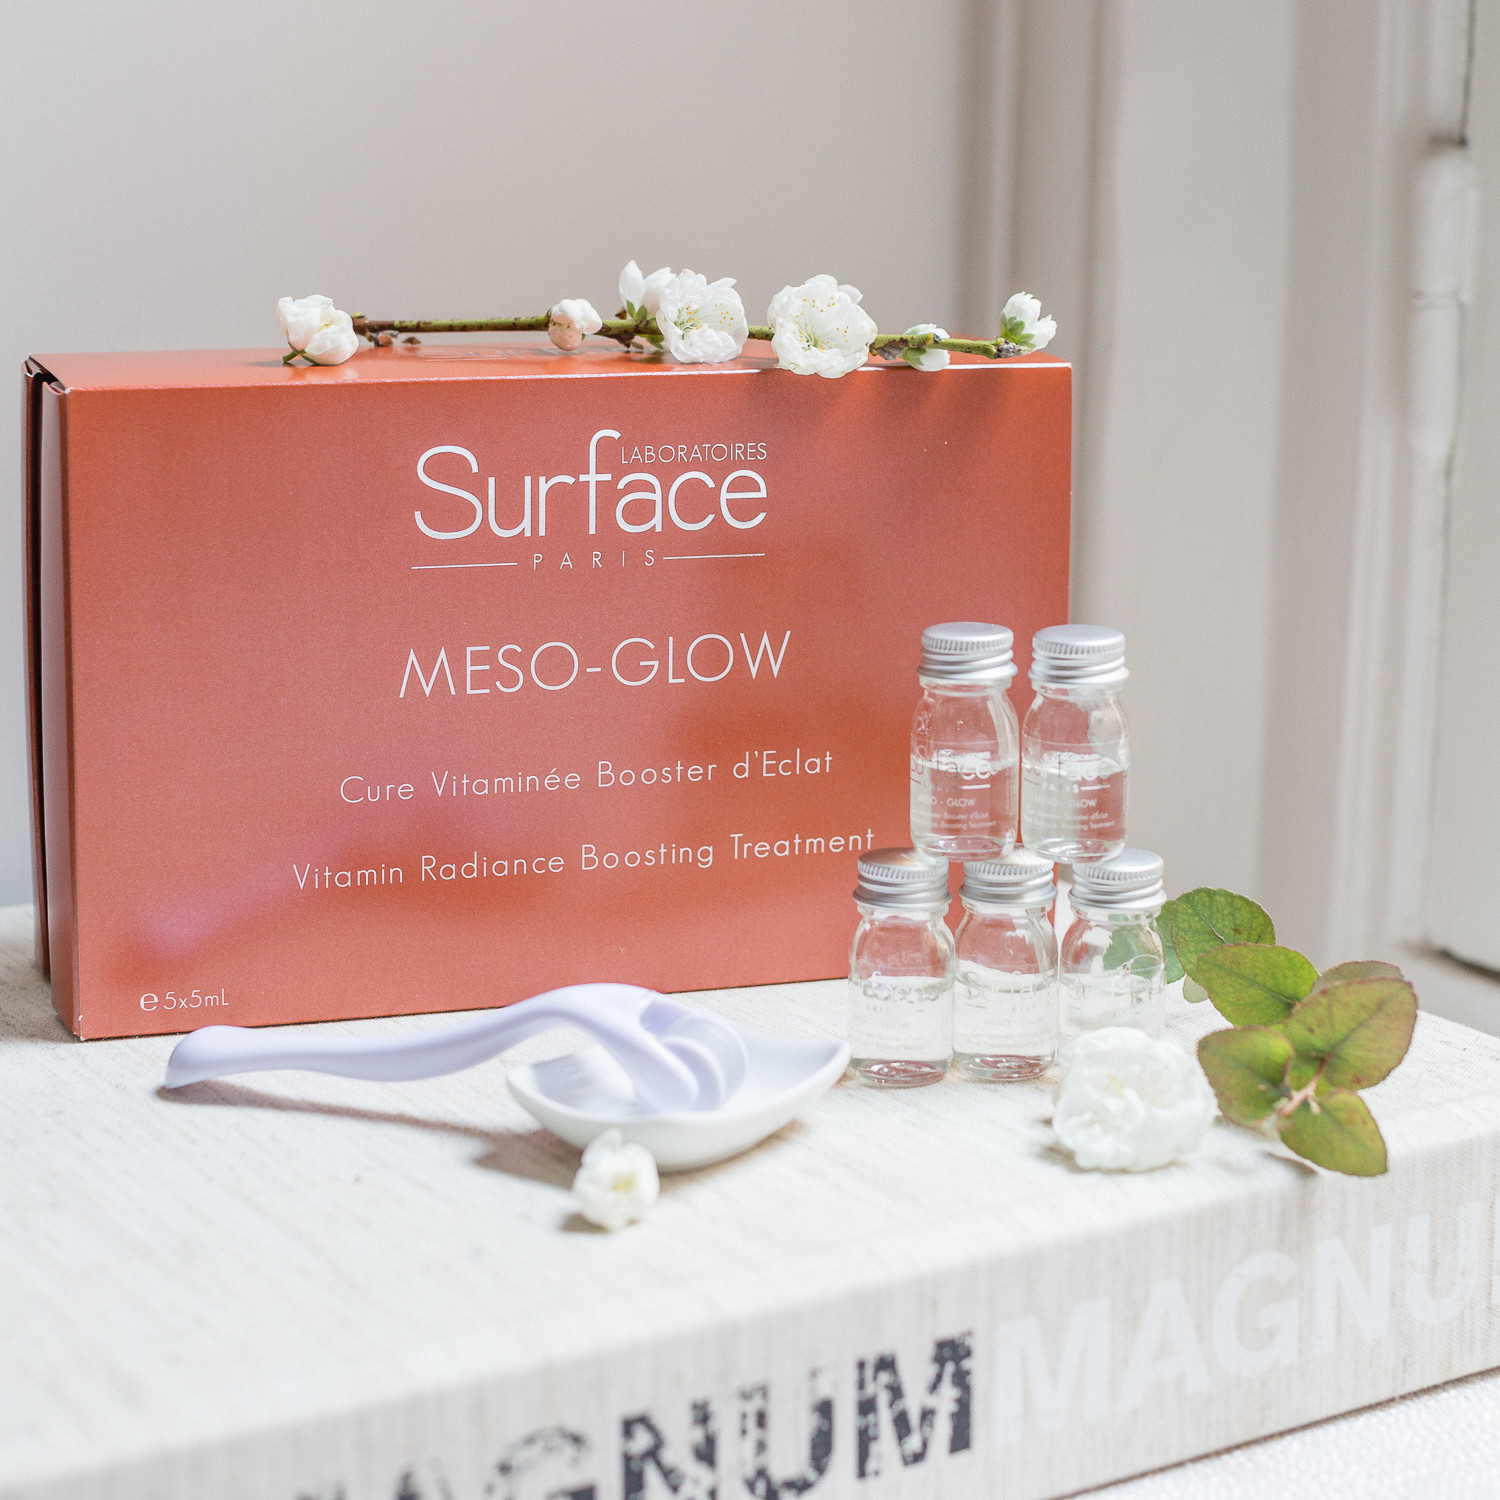 Surface Paris At Home Mesotherapy Treatment Meso Glow